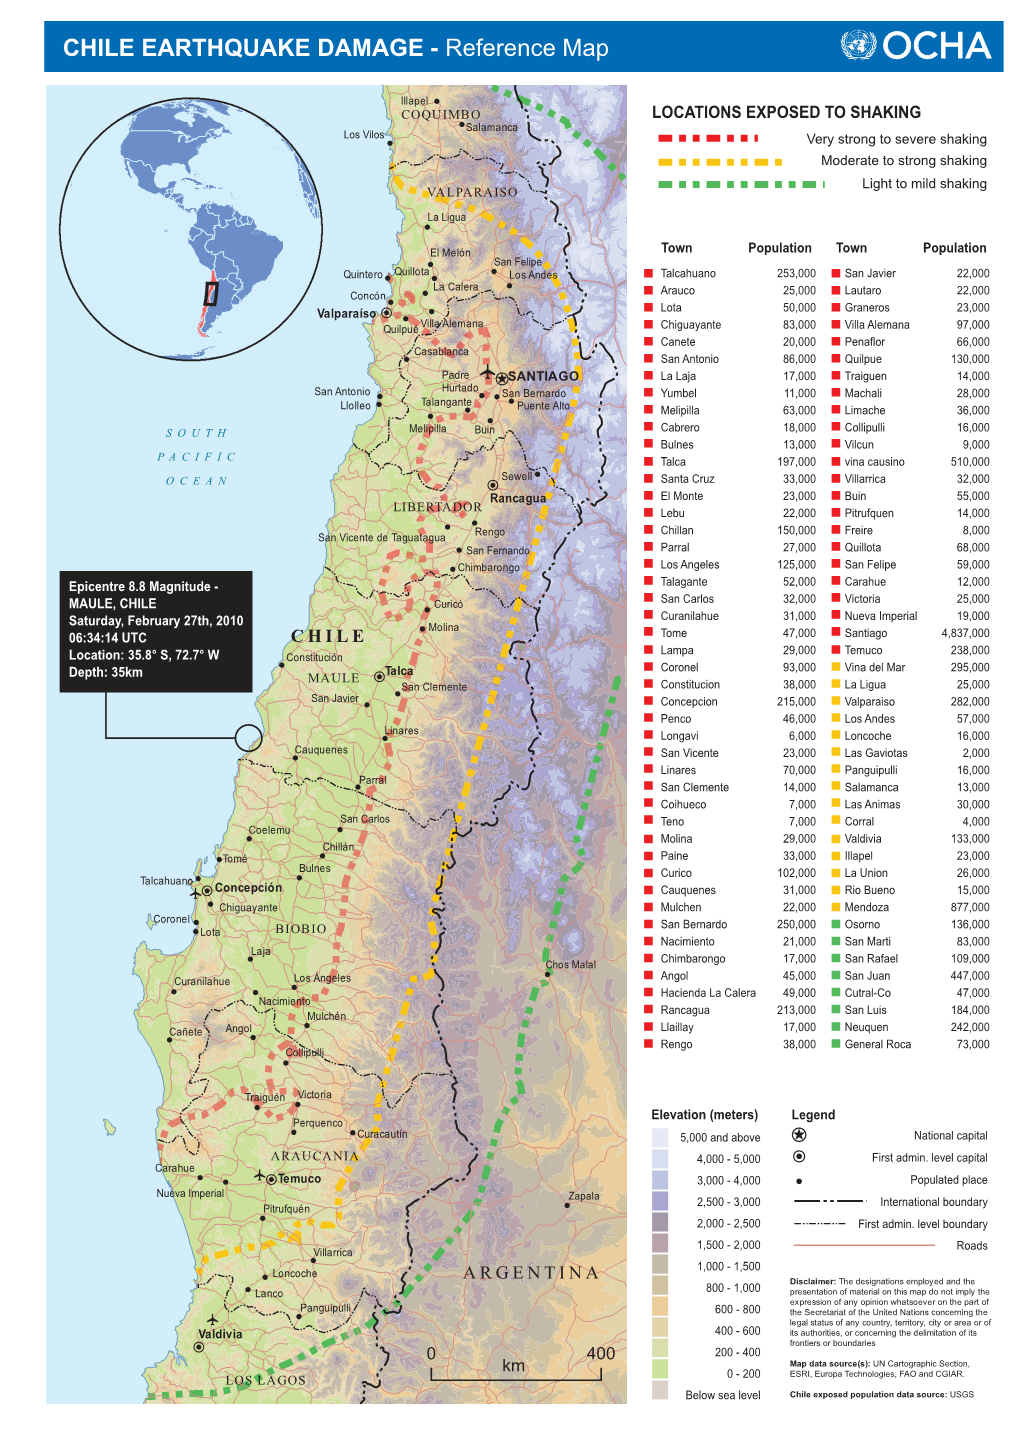 CHILE EARTHQUAKE DAMAGE - Reference Map